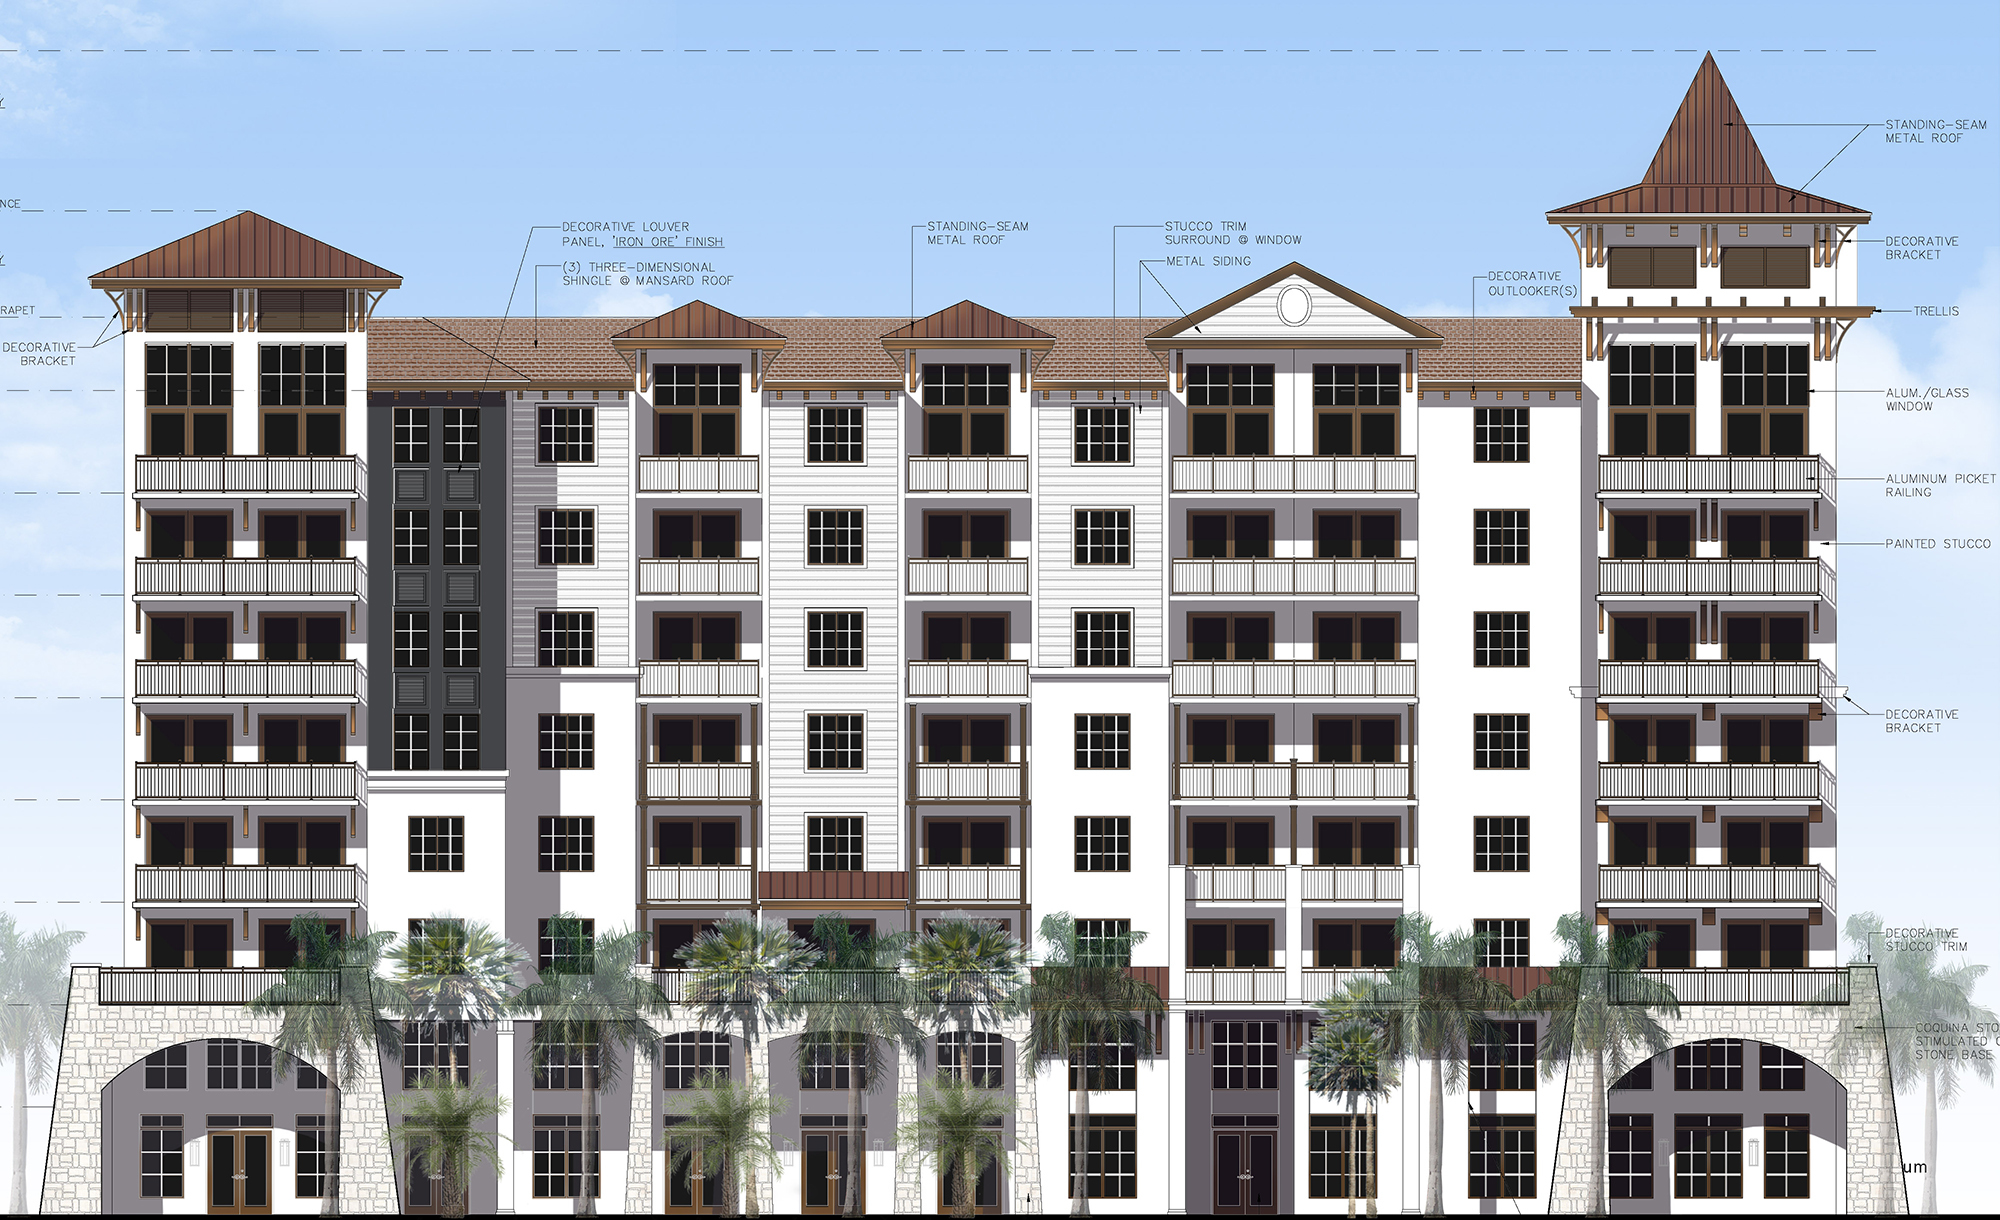 The north elevation for RD River City Brewery apartments.